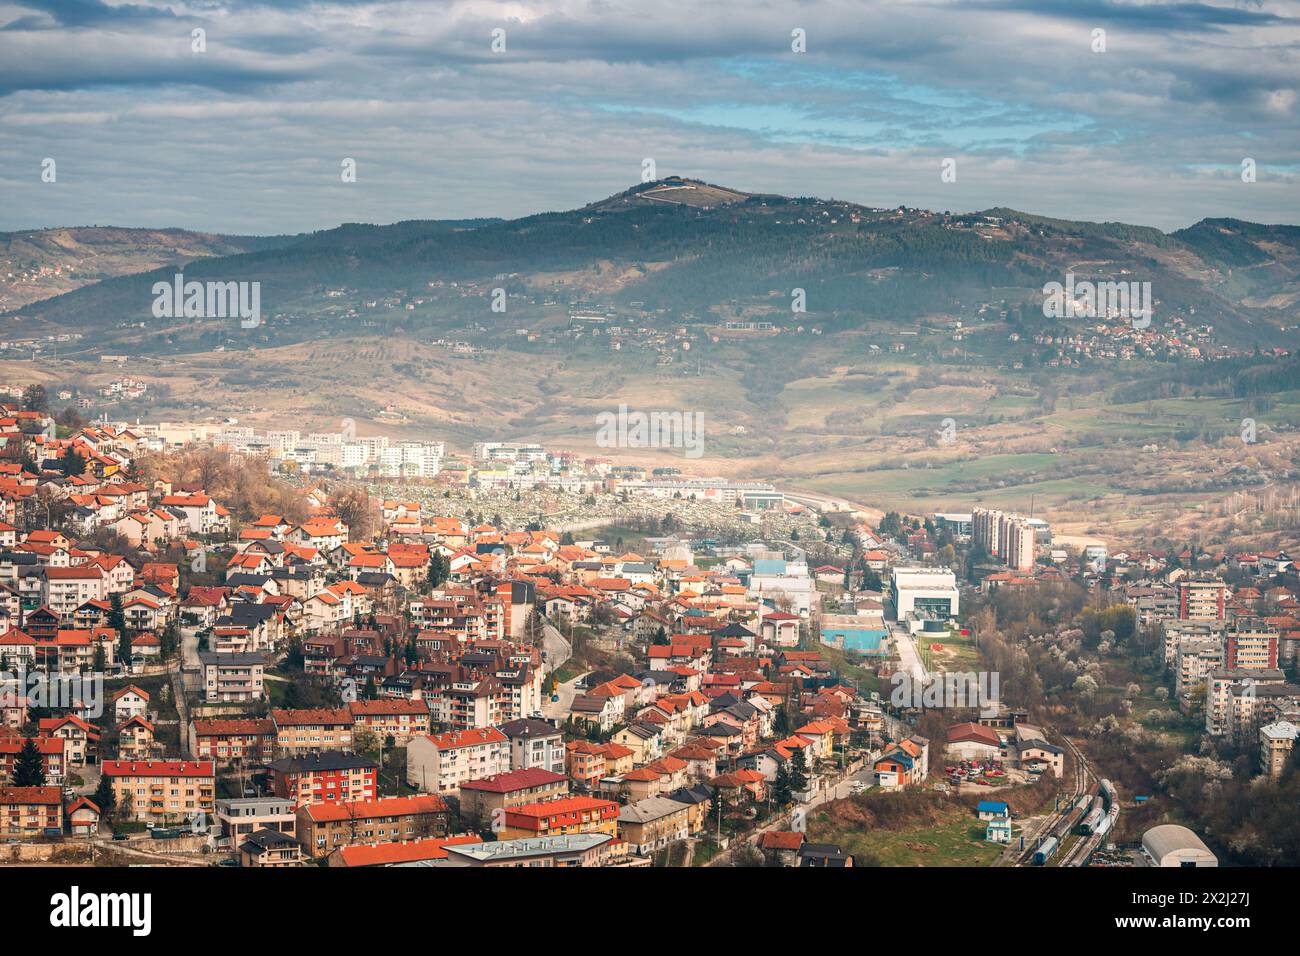 scenic beauty of Sarajevo's cityscape, where old-world charm meets modern architecture against the backdrop of the Balkan mountains. Stock Photo